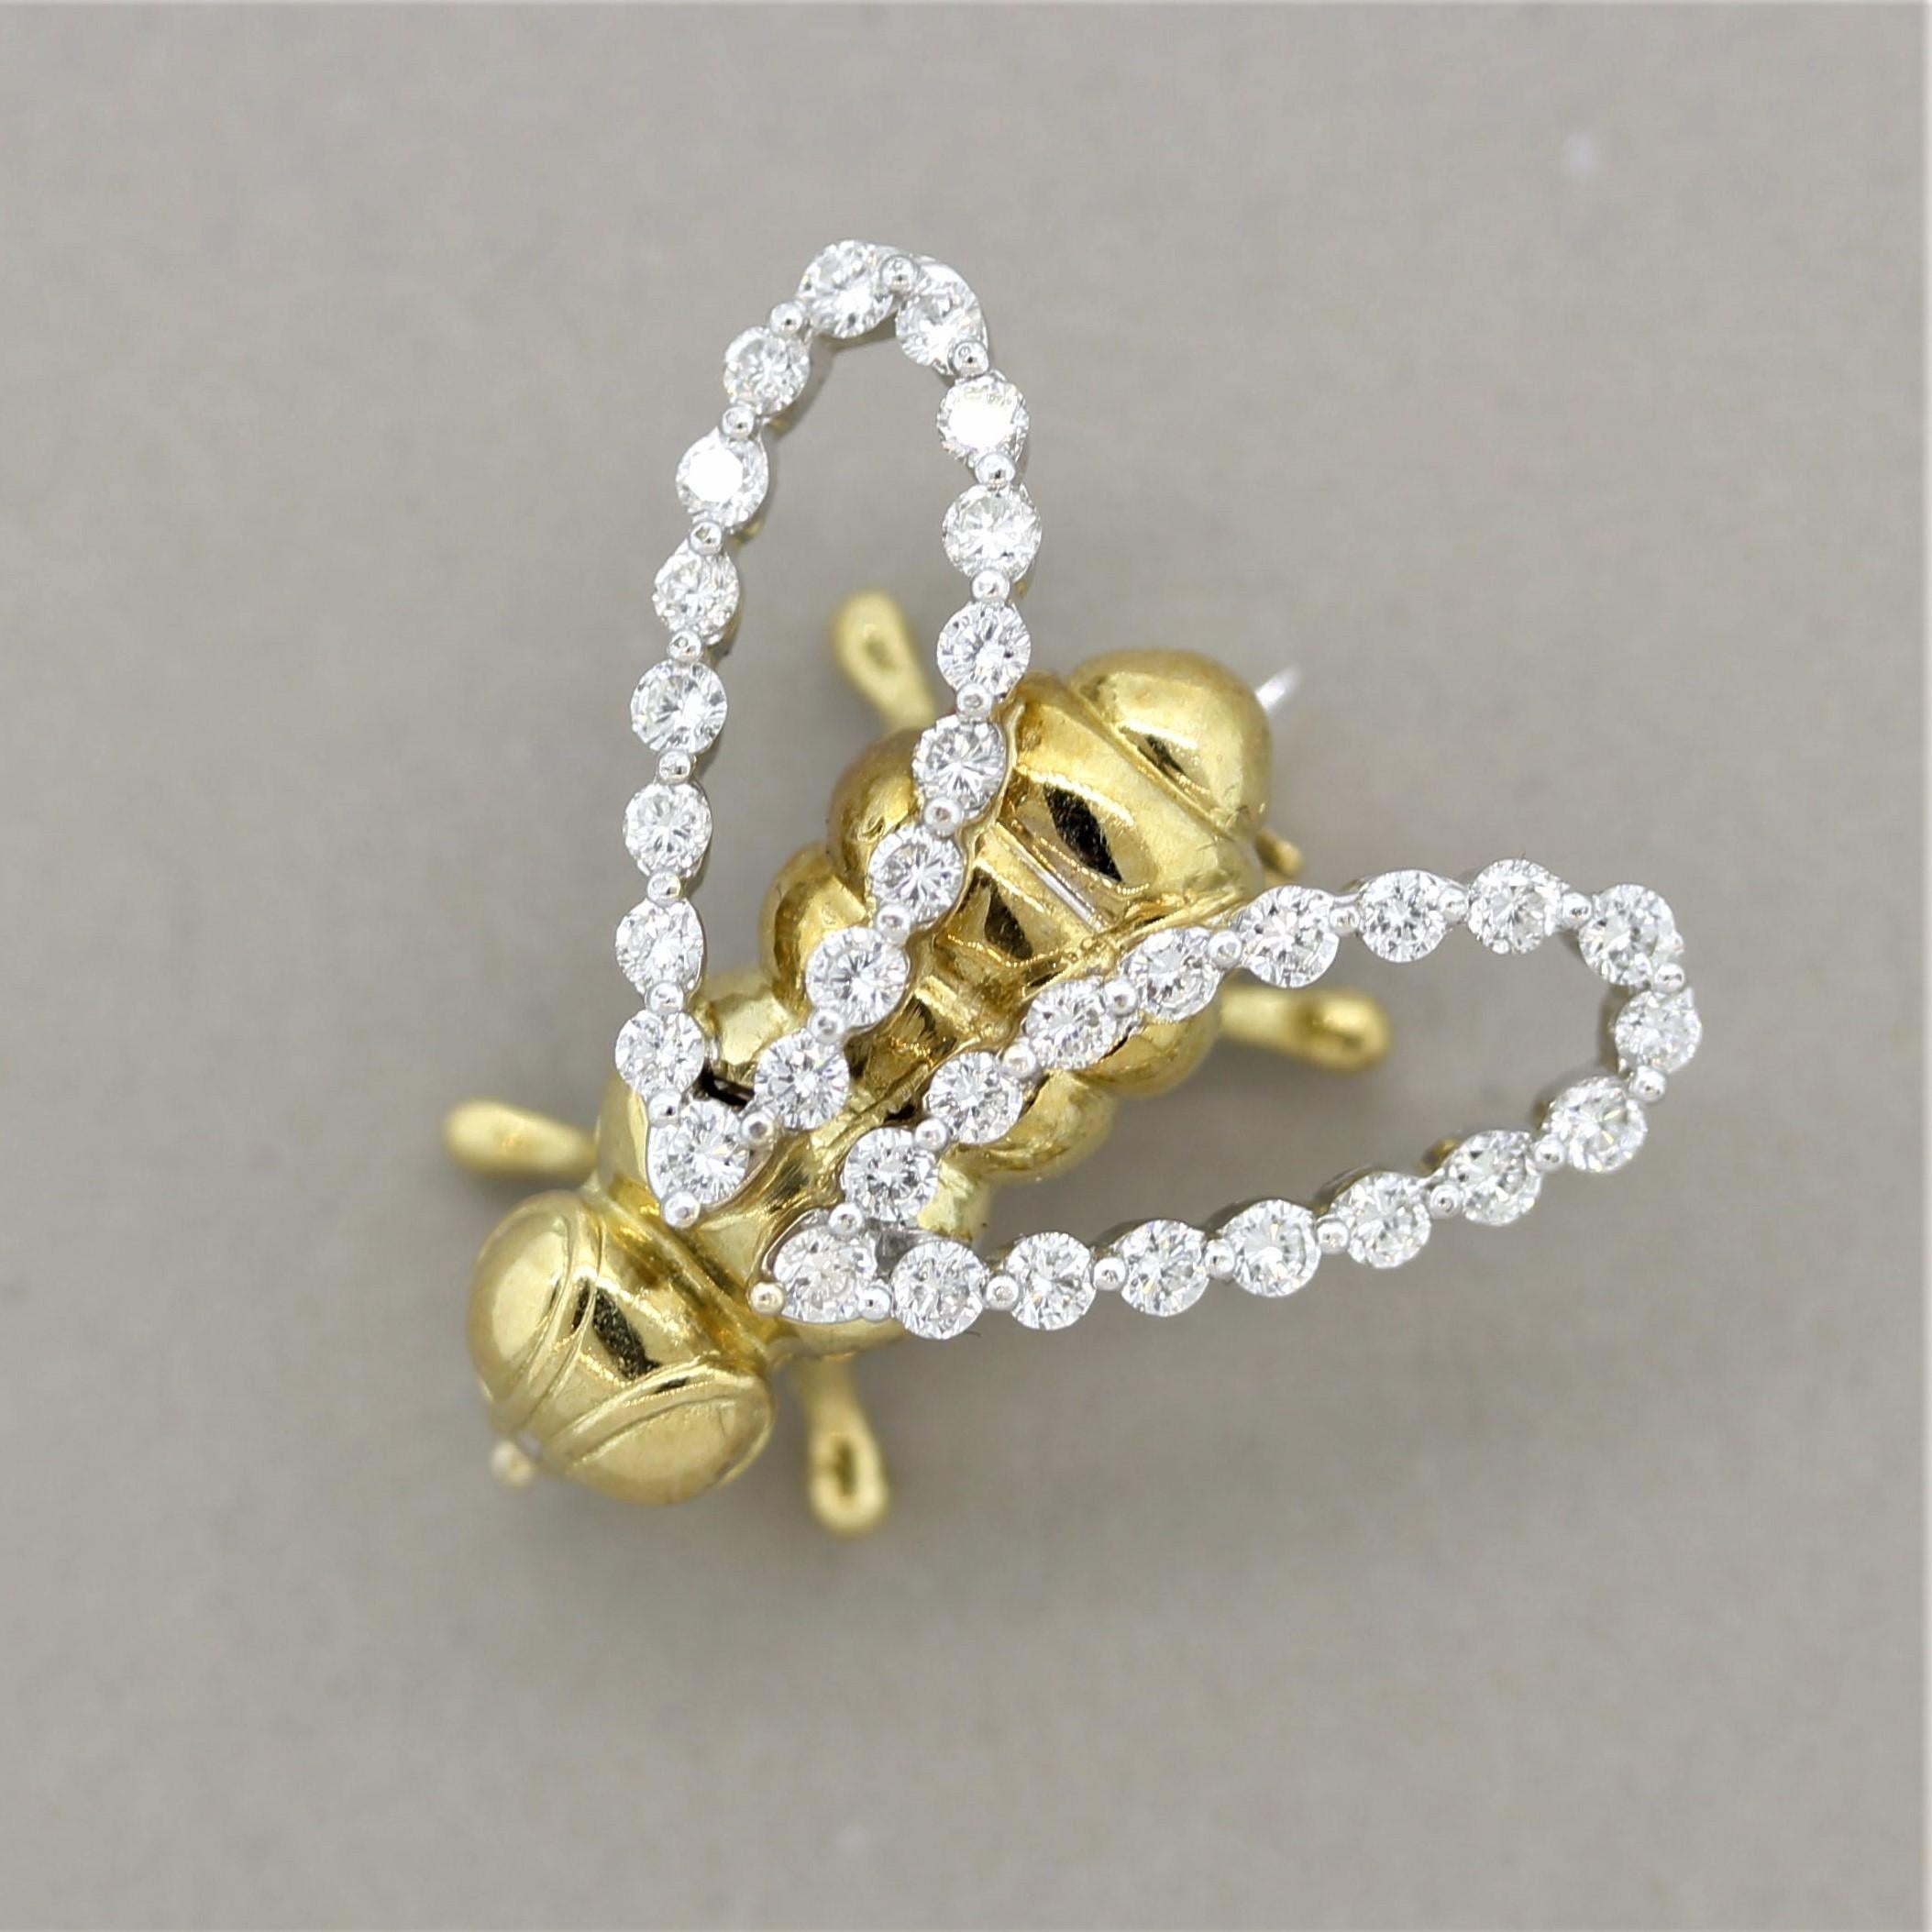 A sweet and friendly bumblebee! Its wings are made of 1.02 carats of fine round brilliant-cut diamond set in 18k white gold. The bee’s body is hand worked to create a realistic figure for our buzzing friend. Made in 18k gold and ready to complement